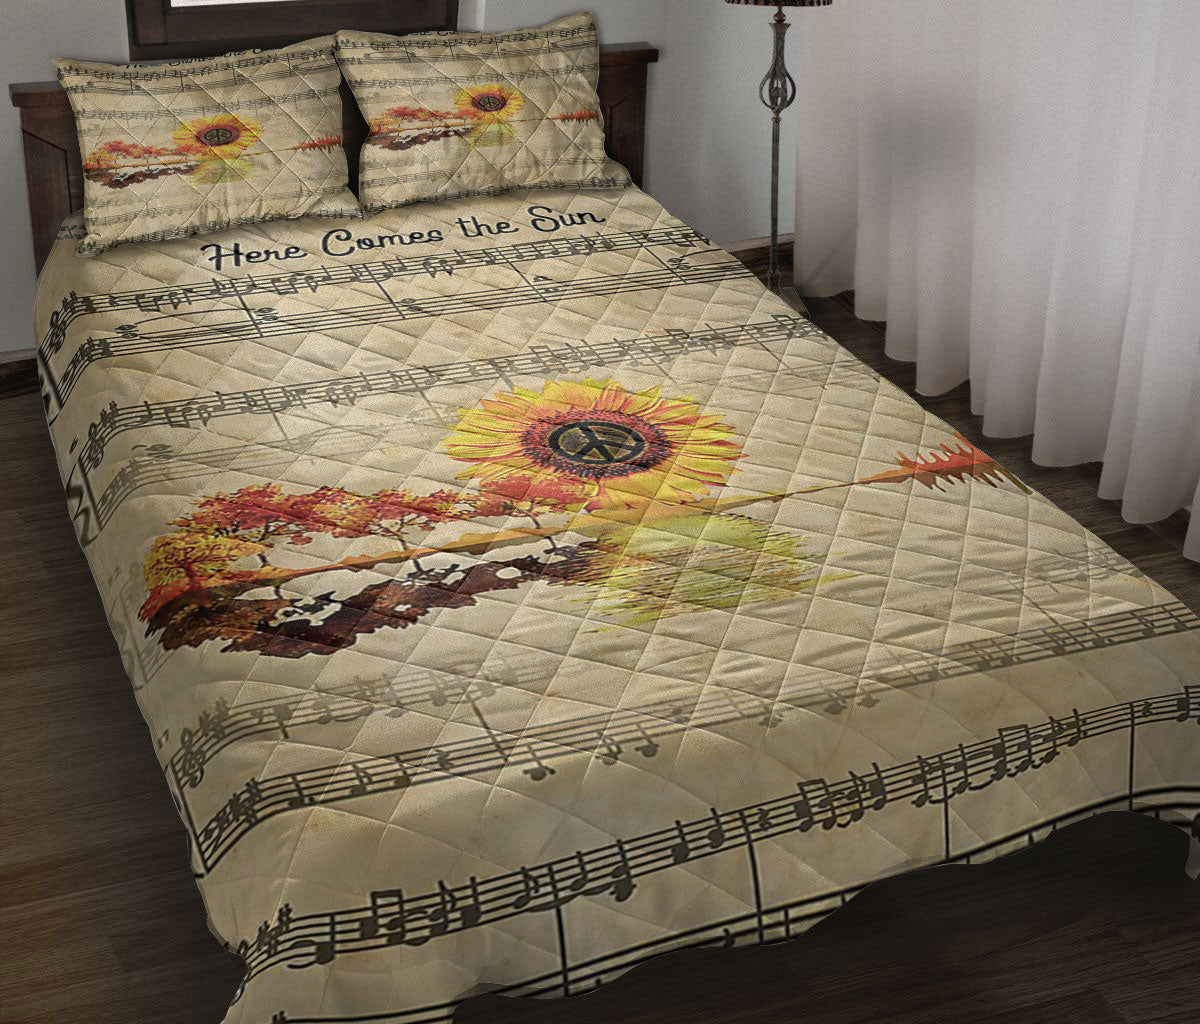 Ohaprints-Quilt-Bed-Set-Pillowcase-Guitar-Sunflower-Peace-Here-Come-The-Sun-Gift-For-Guitarist-Blanket-Bedspread-Bedding-1482-Throw (55'' x 60'')